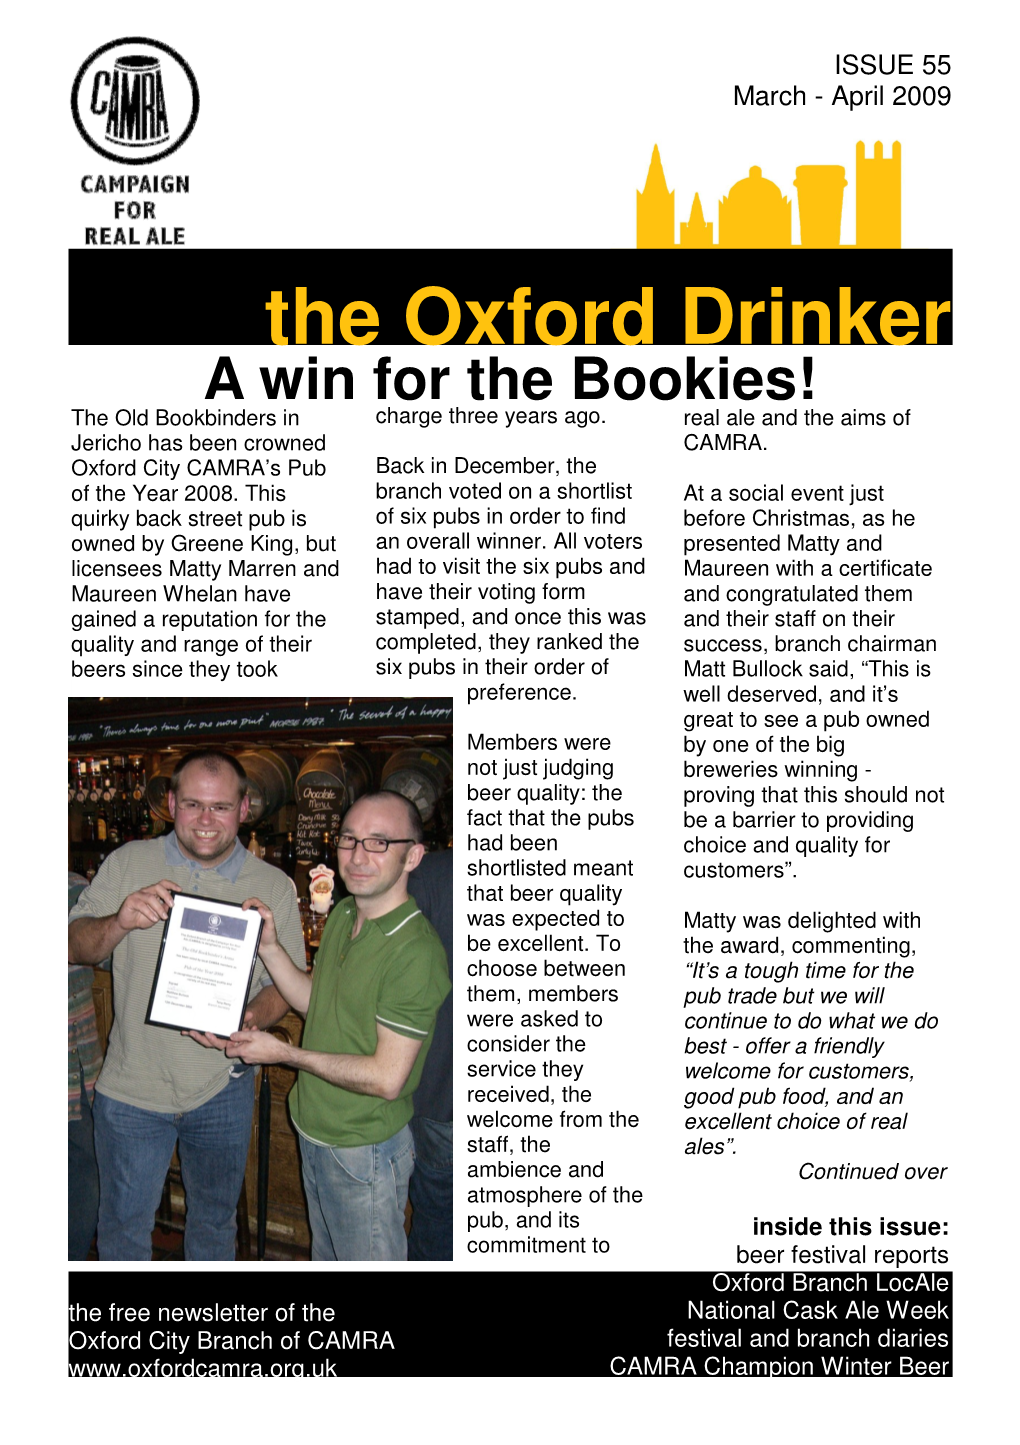 The Oxford Drinker a Win for the Bookies! the Old Bookbinders in Charge Three Years Ago